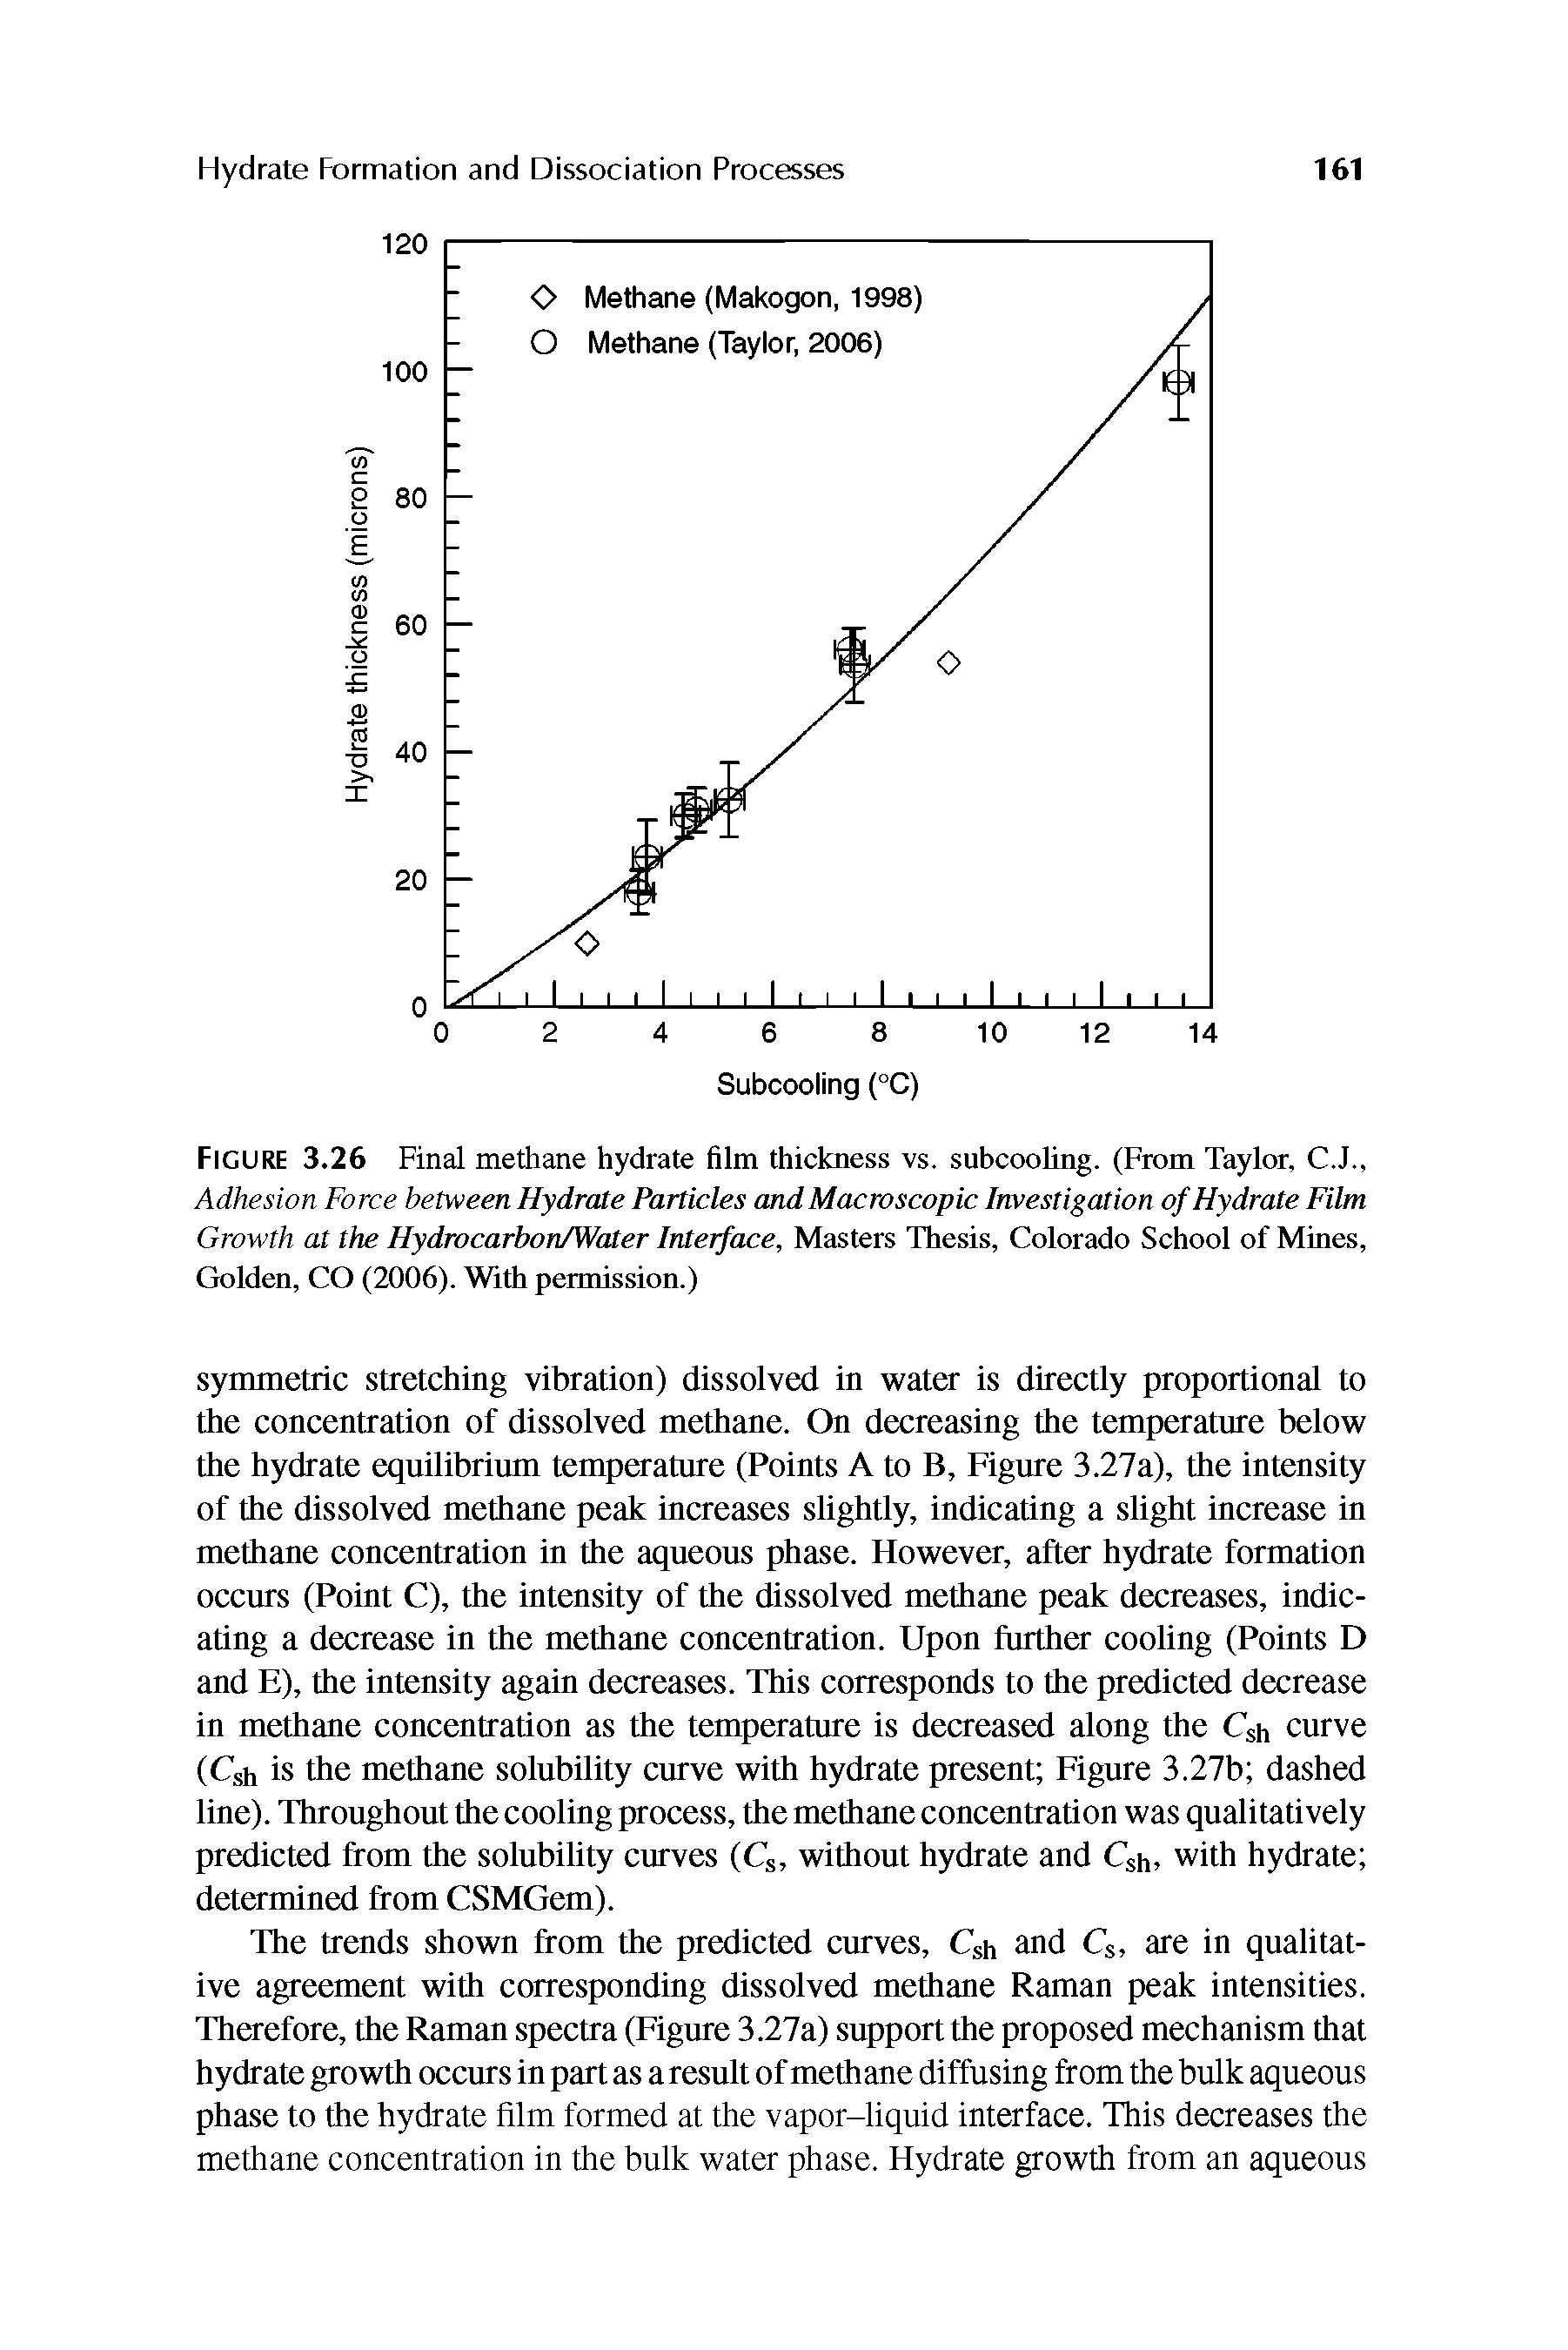 Figure 3.26 Final methane hydrate film thickness vs. subcooling. (From Taylor, C.J., Adhesion Force between Hydrate Particles and Macroscopic Investigation of Hydrate Film Growth at the Hydrocarbon/Water Interface, Masters Thesis, Colorado School of Mines, Golden, CO (2006). With permission.)...